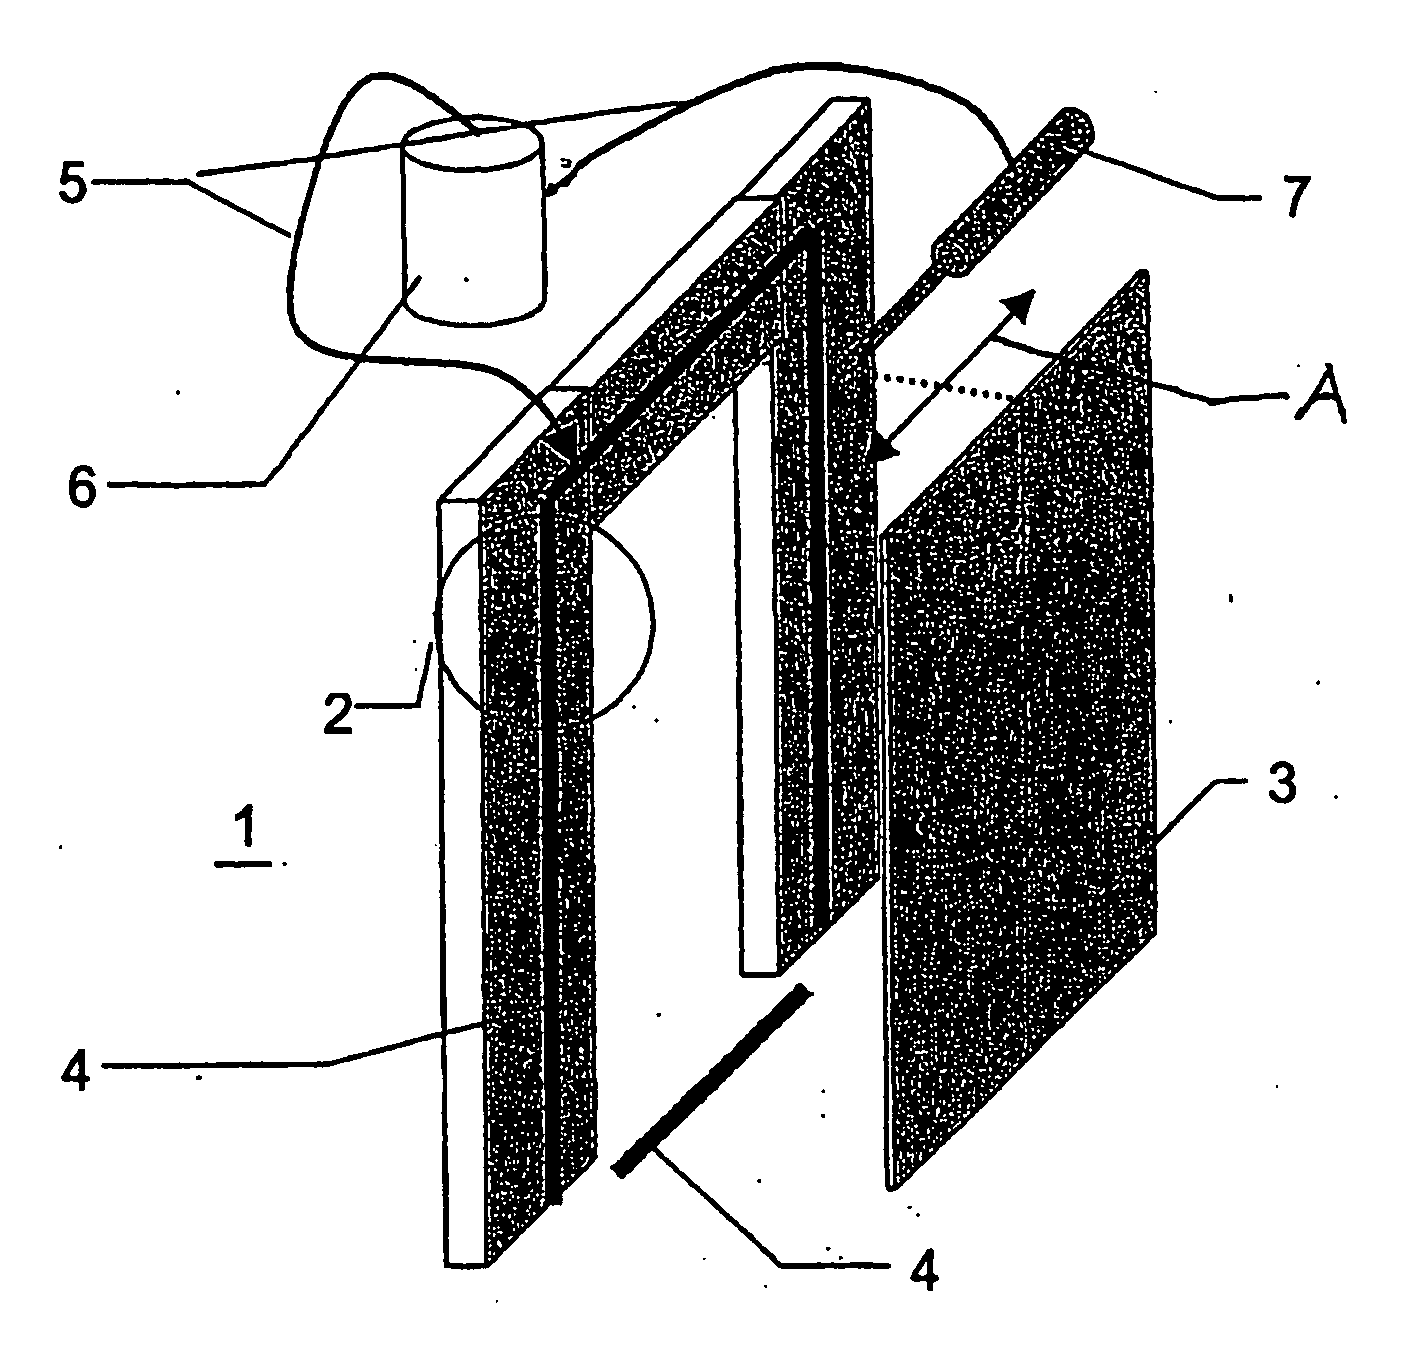 Device for sealing a gap between car door and car wall in an elevator car